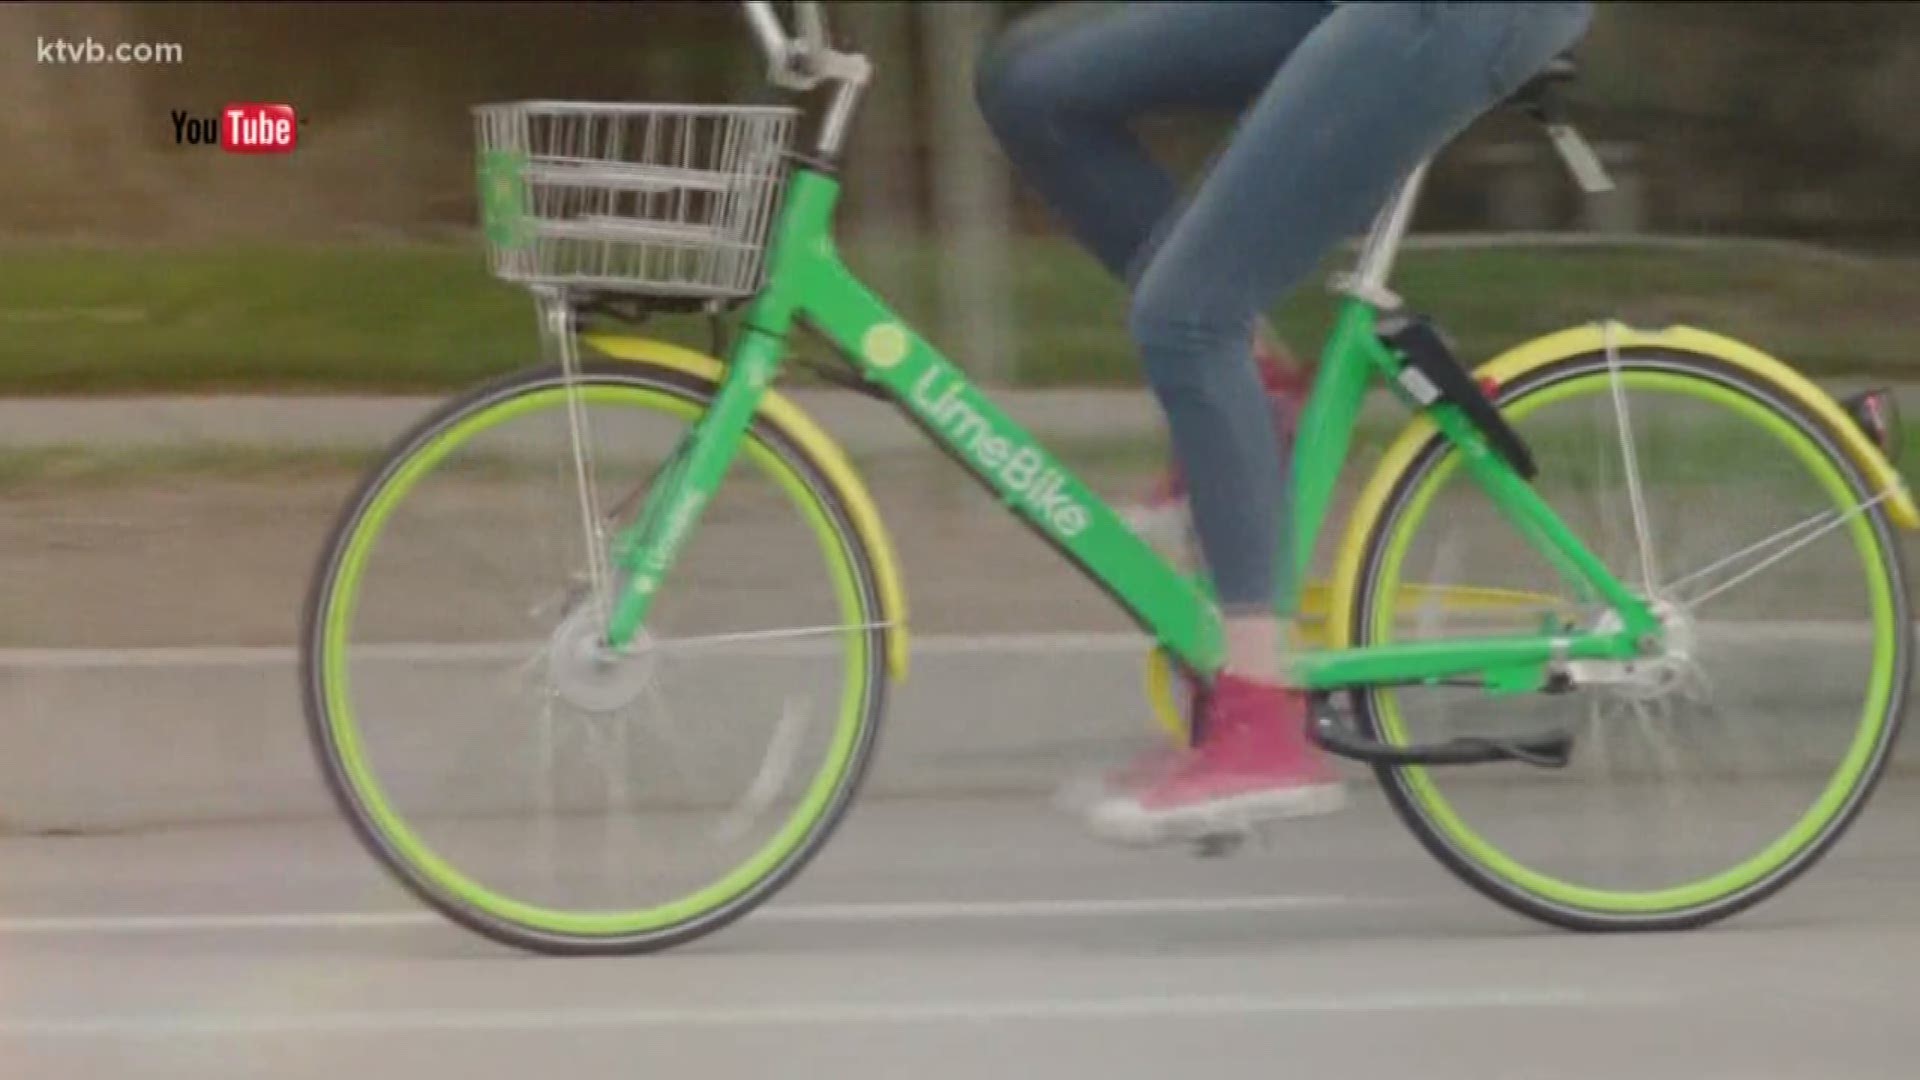 The city is looking at other cities where dockless bikes have worked well to craft its rules.